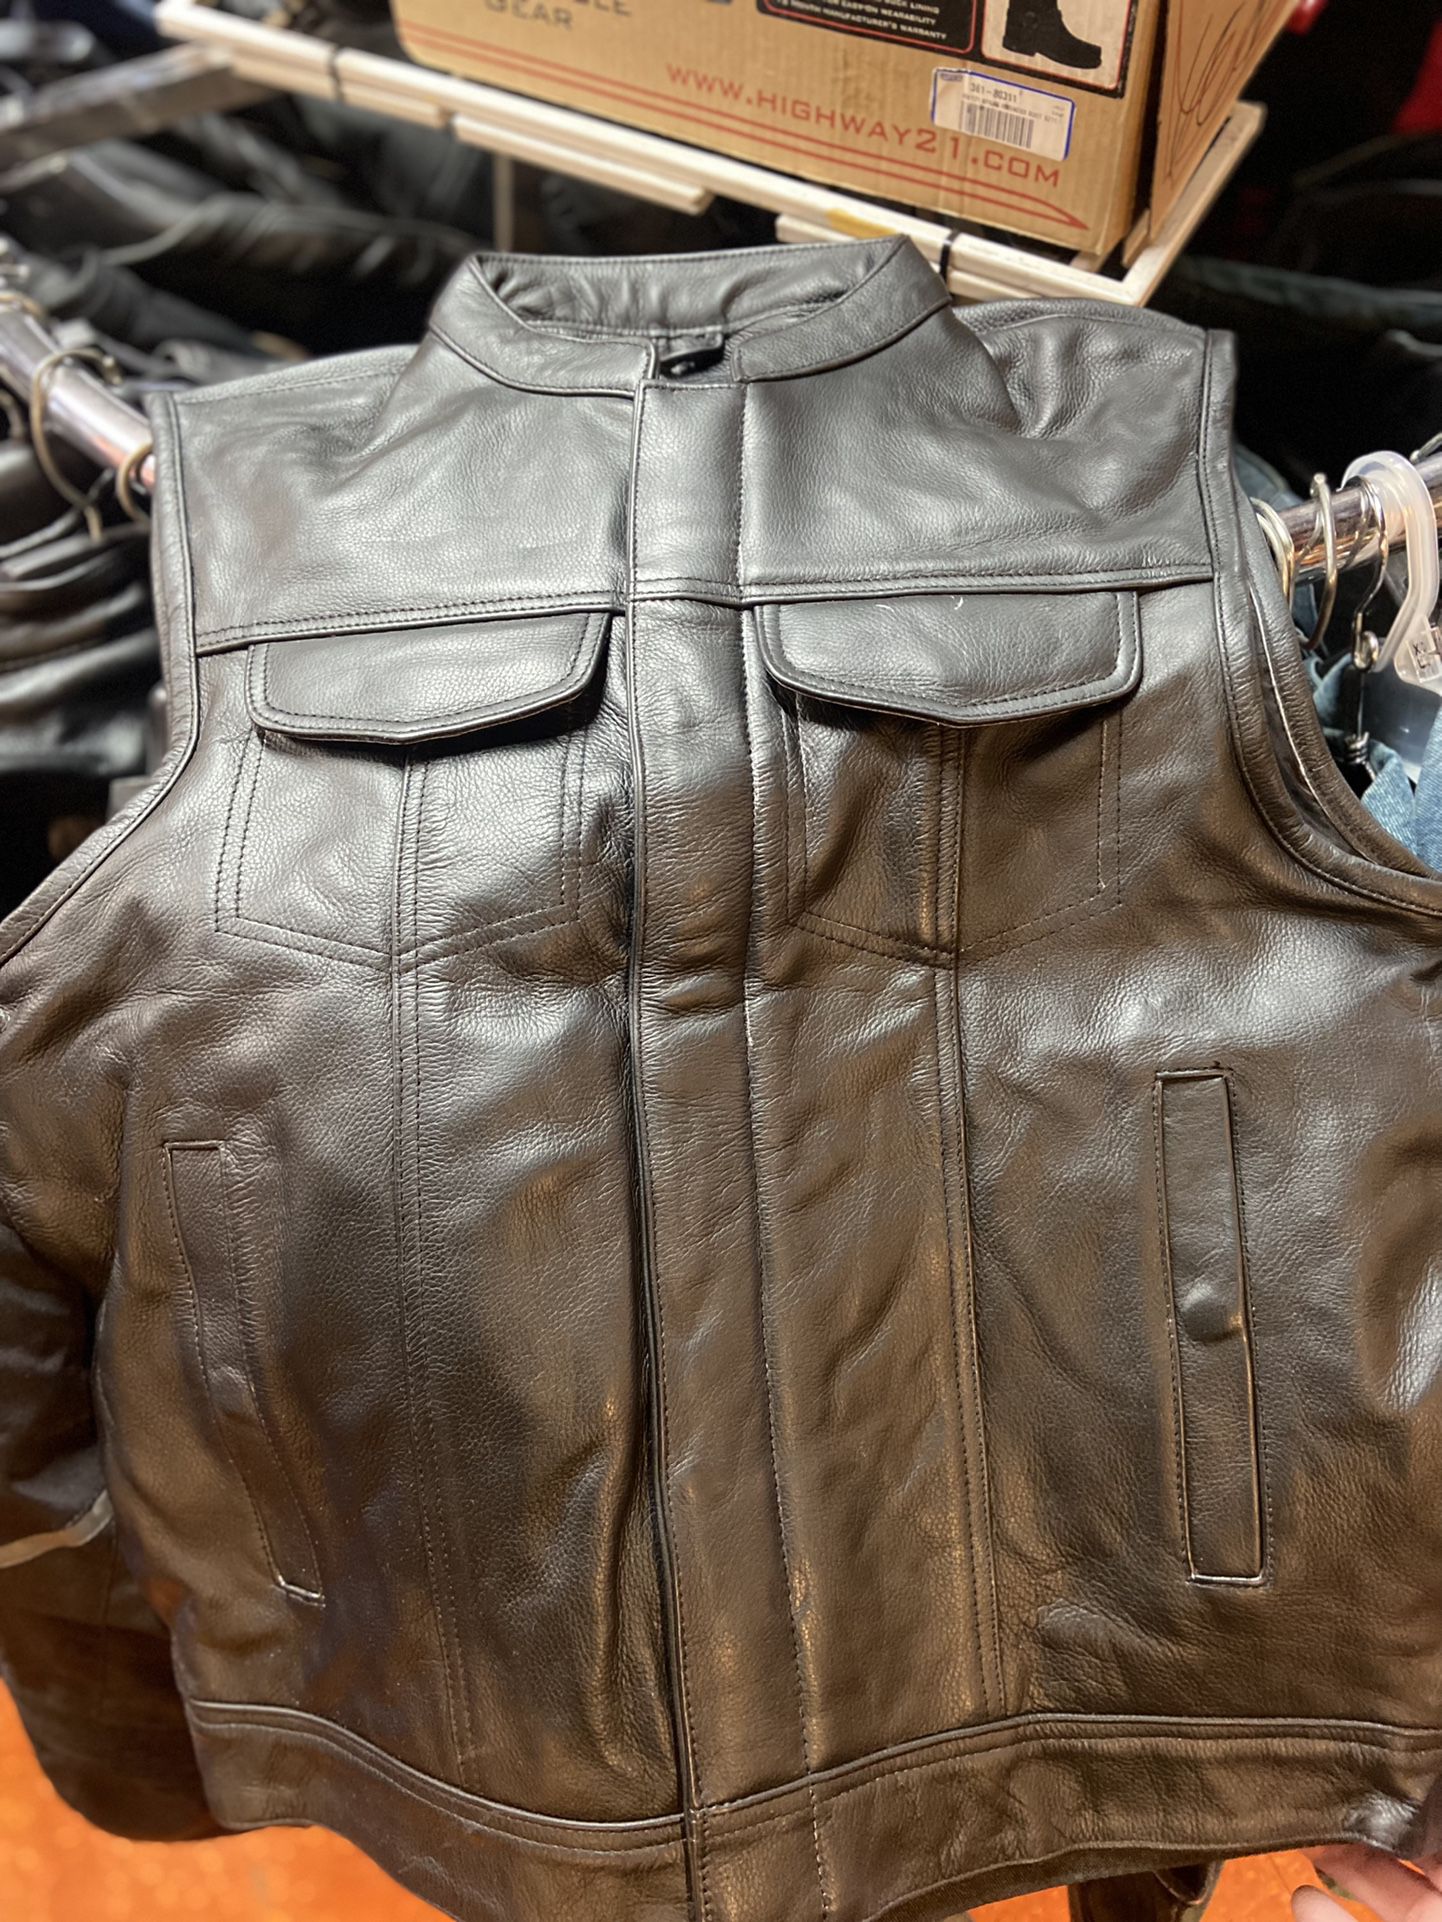 New Harley Davidson Motorcycle Club Style Leather Vest $140